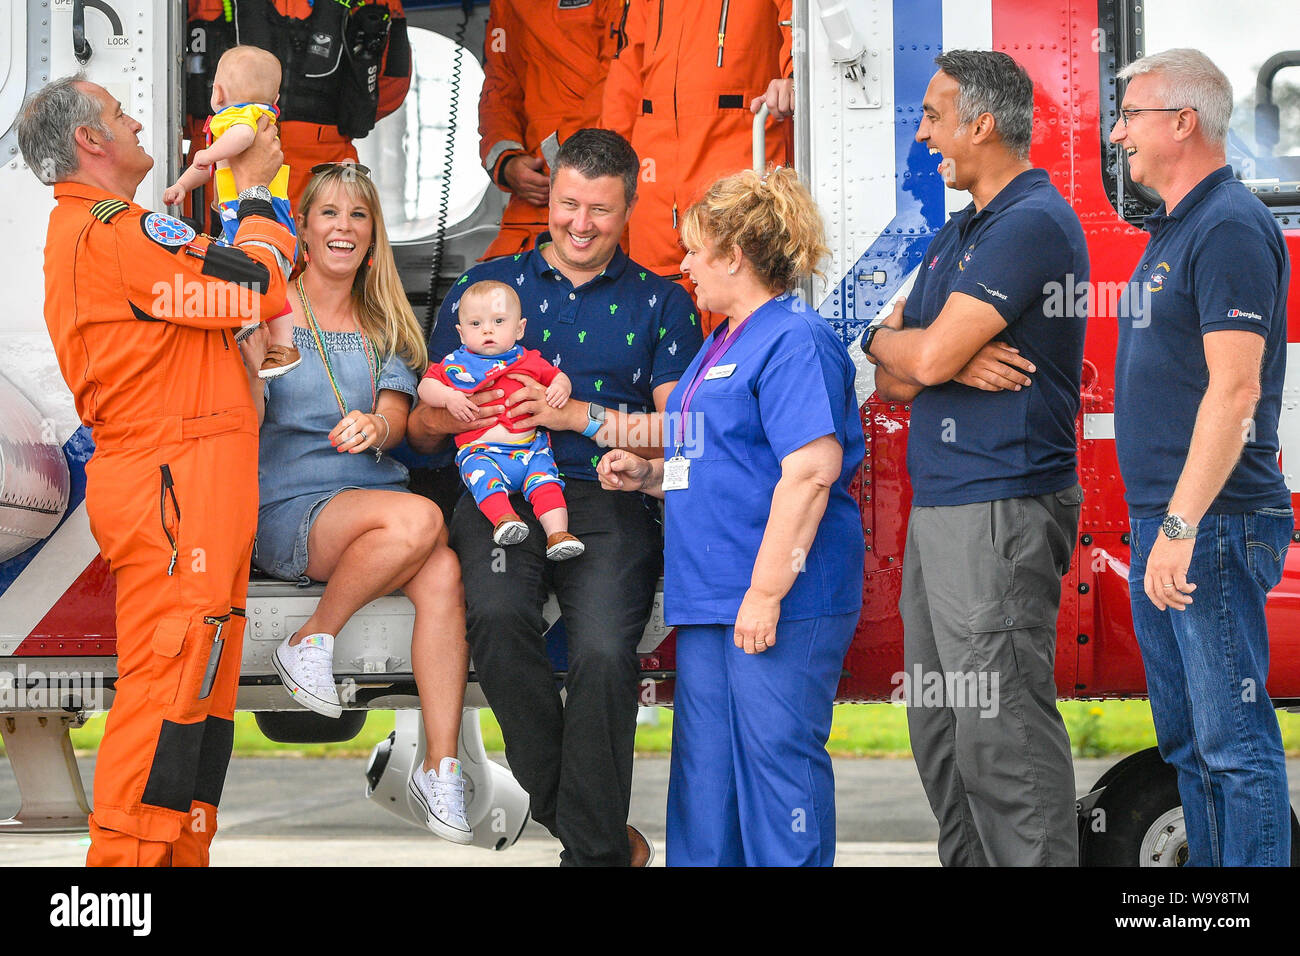 Jennie and Rich Powell with their twin boys Jenson, left, Ruben, right, who are celebrating their first birthday by meeting HM Coastguard crews for the first time since Jennie was airlifted by them in a helicopter to Oxford from Cornwall after she went into labour at 22 weeks with her twins, giving birth the youngest surviving pre-term twin boys born in Britain. Pictured (left to right) are Chief Crewman Ian Copley, Jenson, Jennie, Ruben, Rich, Midwife Jane Parke who accompanied Jennie on the flight, Winchman-Paramedic Niall Hanson and Co-Pilot Ivan Hamilton. Stock Photo